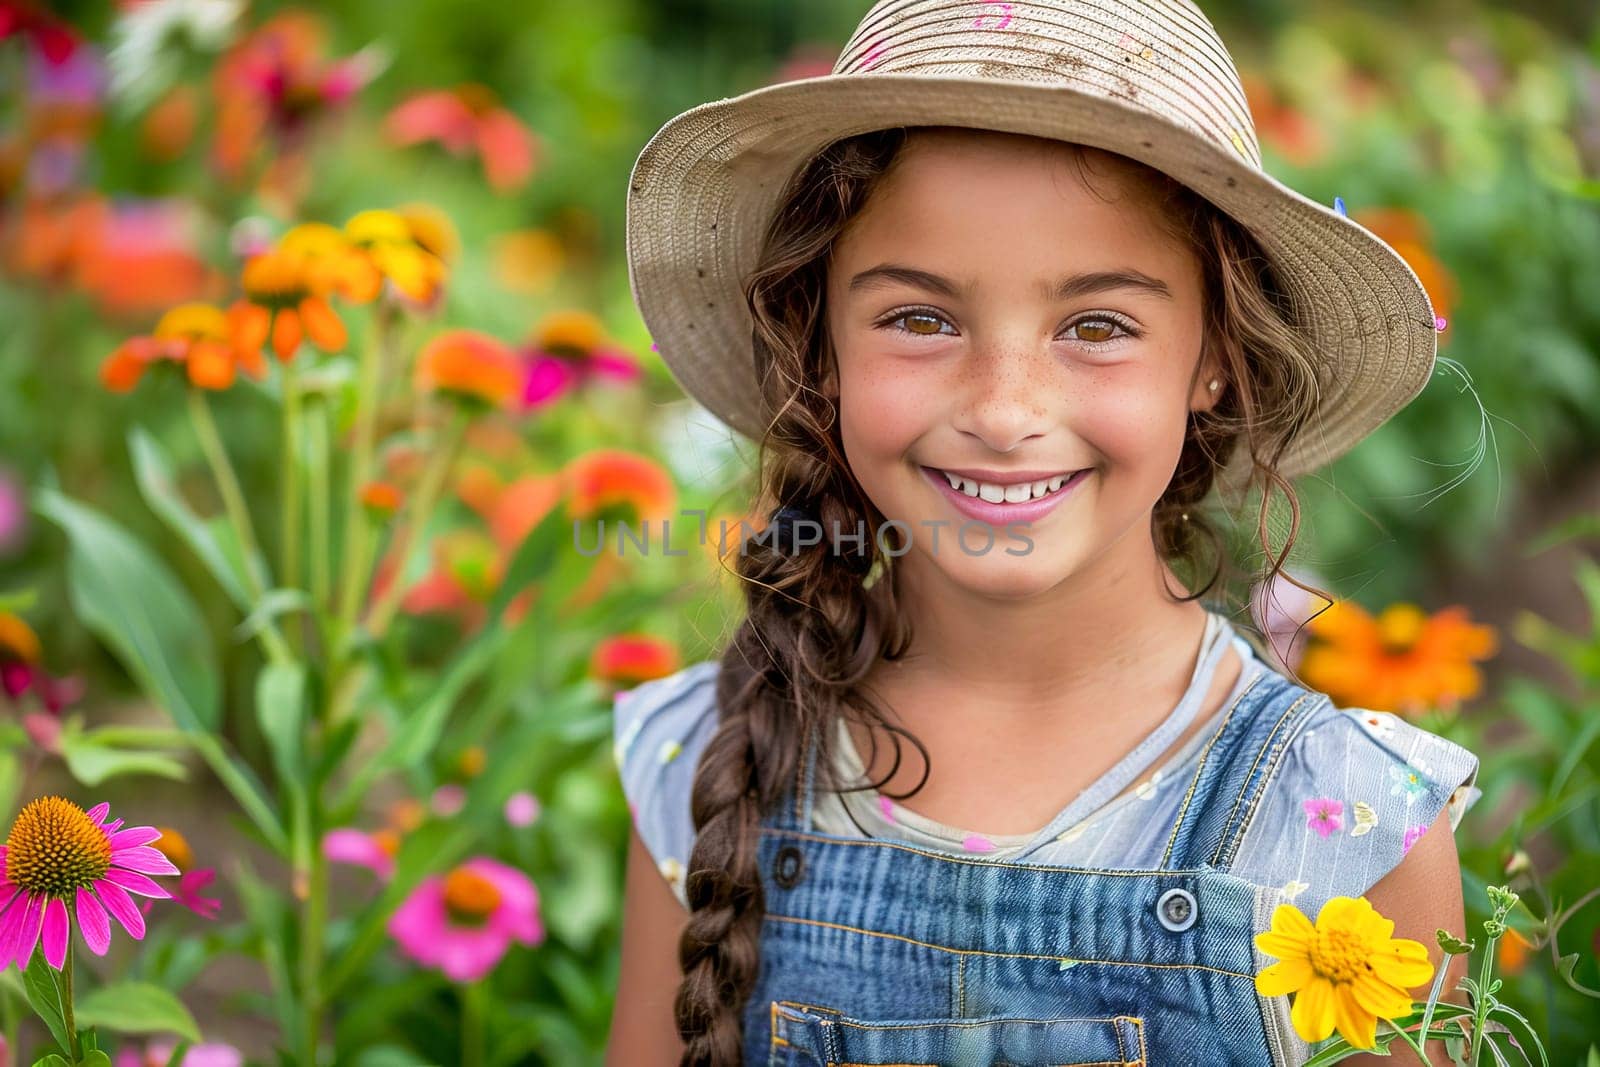 Happy girl in overalls and hat doing gardening and smiling at the camera, in a garden with many bright flowers.